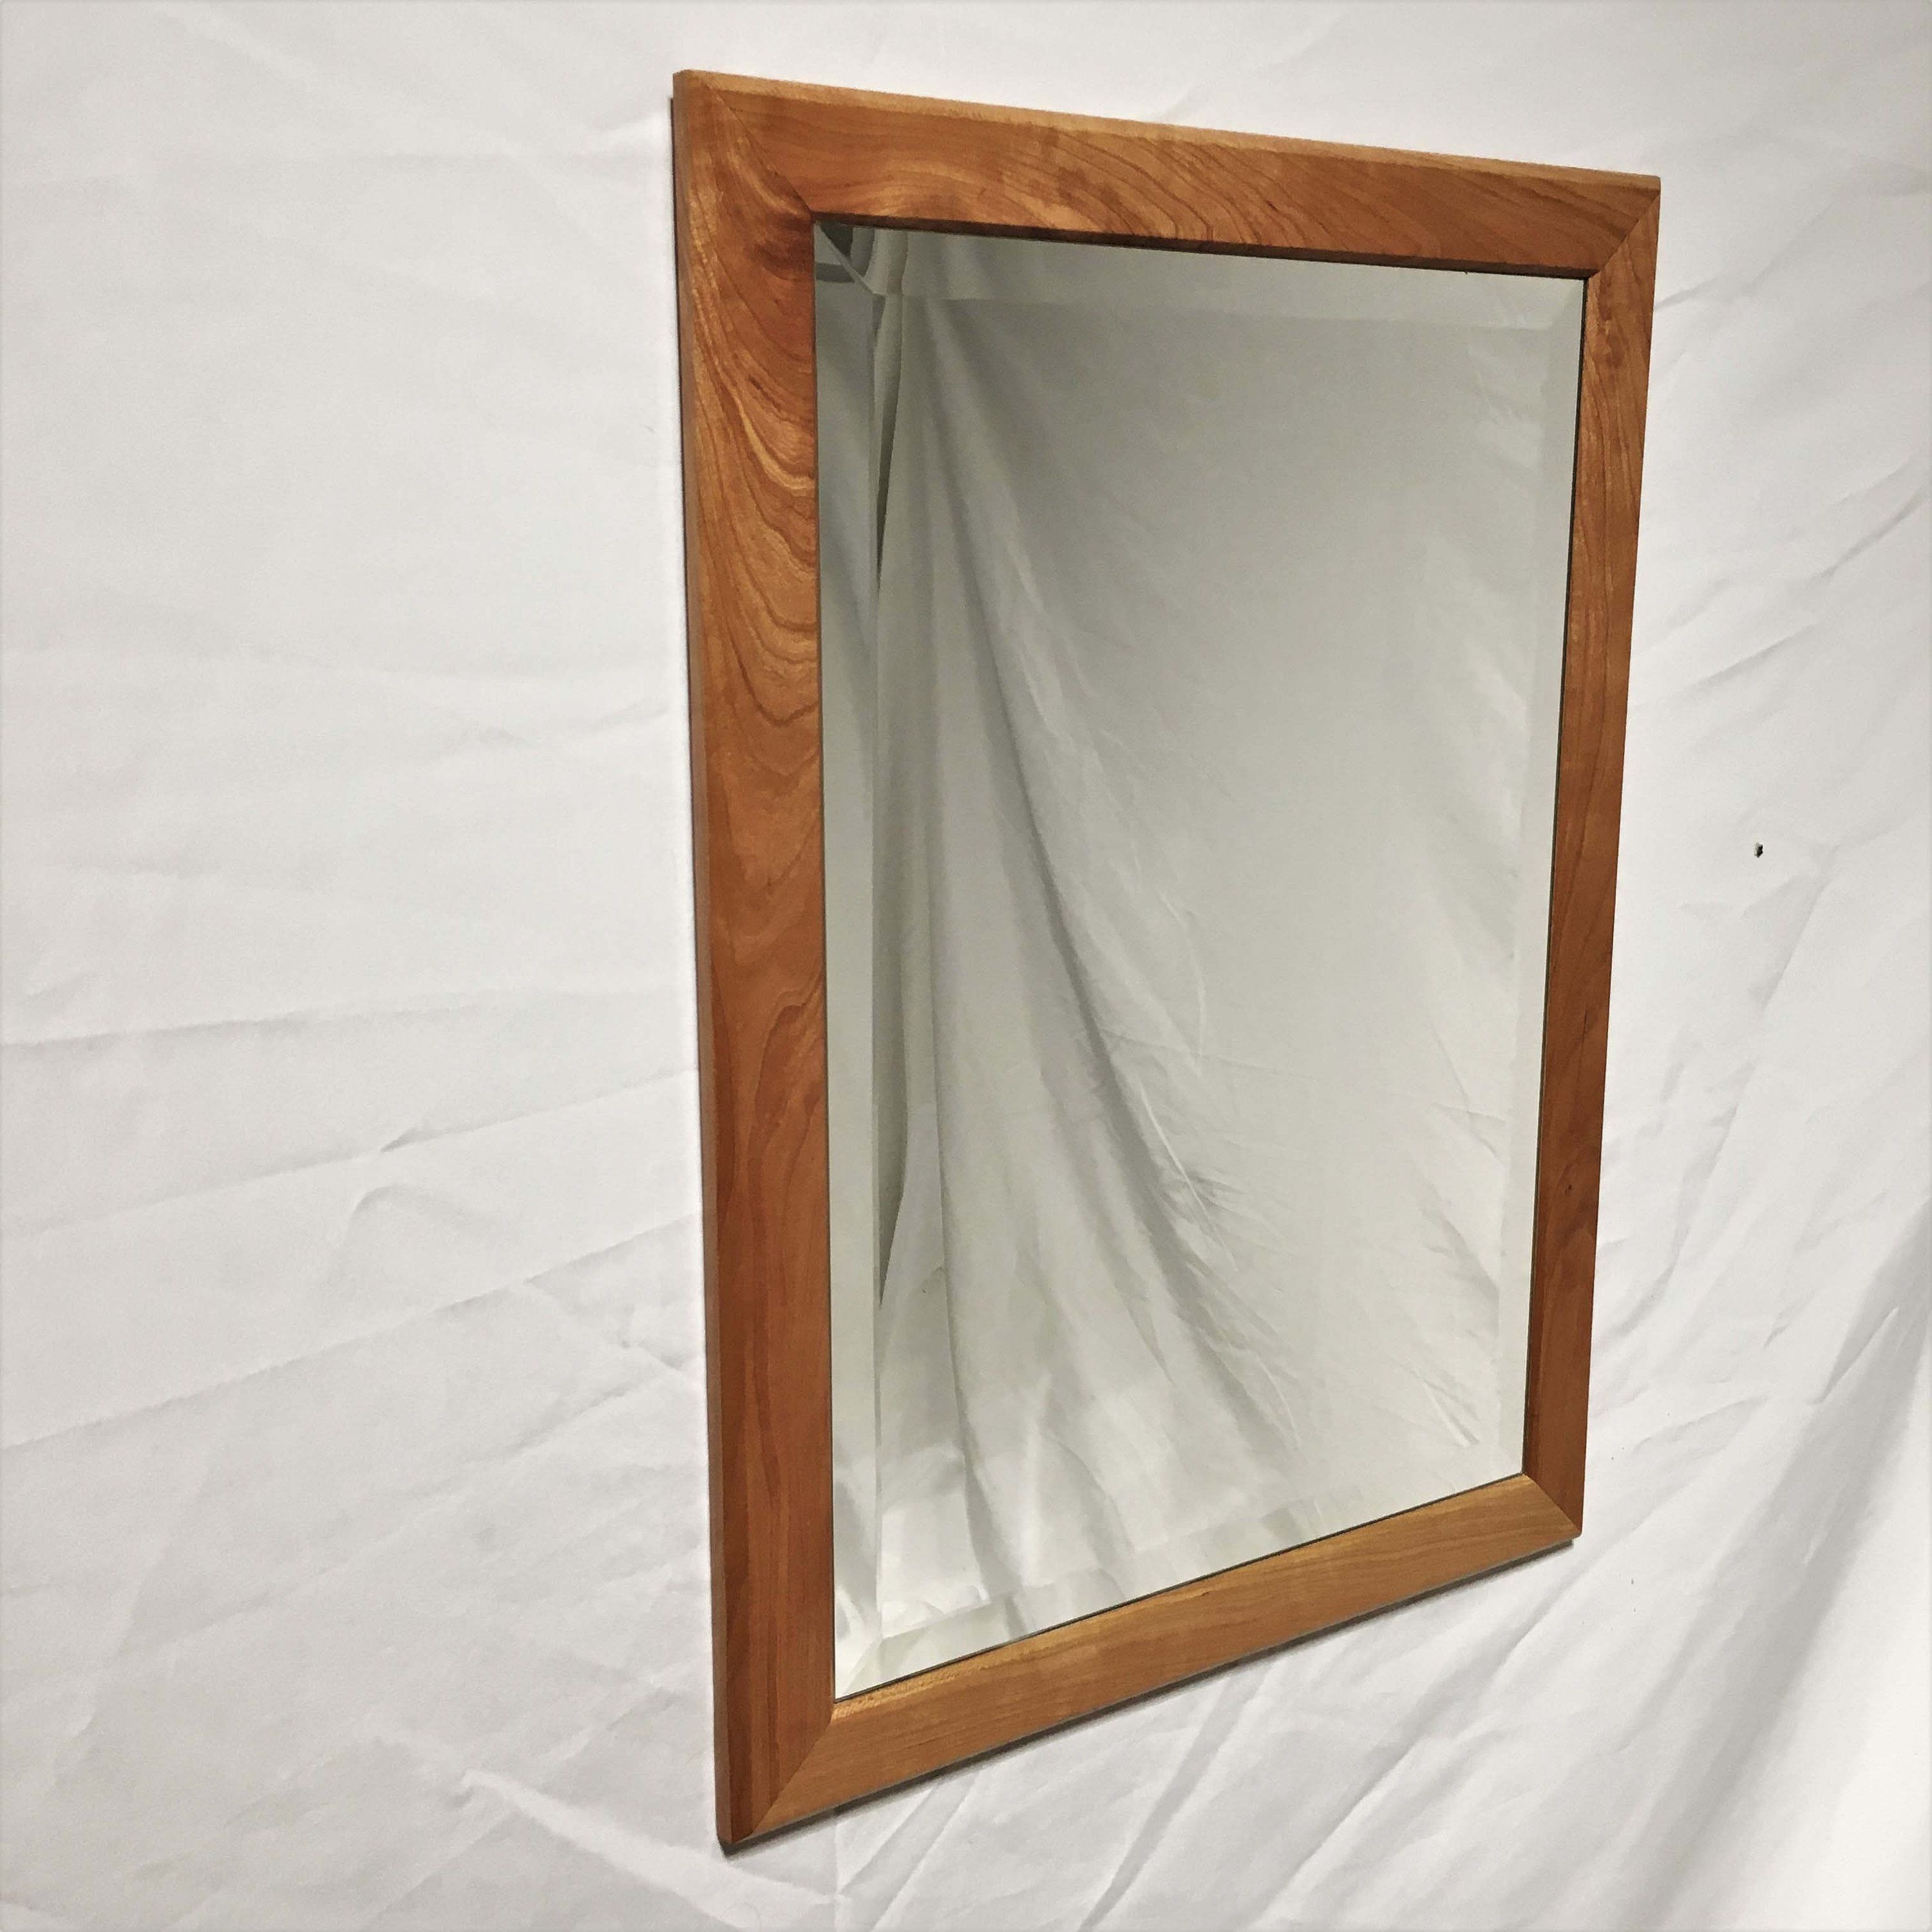 Wood Frame Wall Mirror Michigan Cherry Pertaining To Well Liked Cherry Wood Framed Wall Mirrors (View 7 of 20)